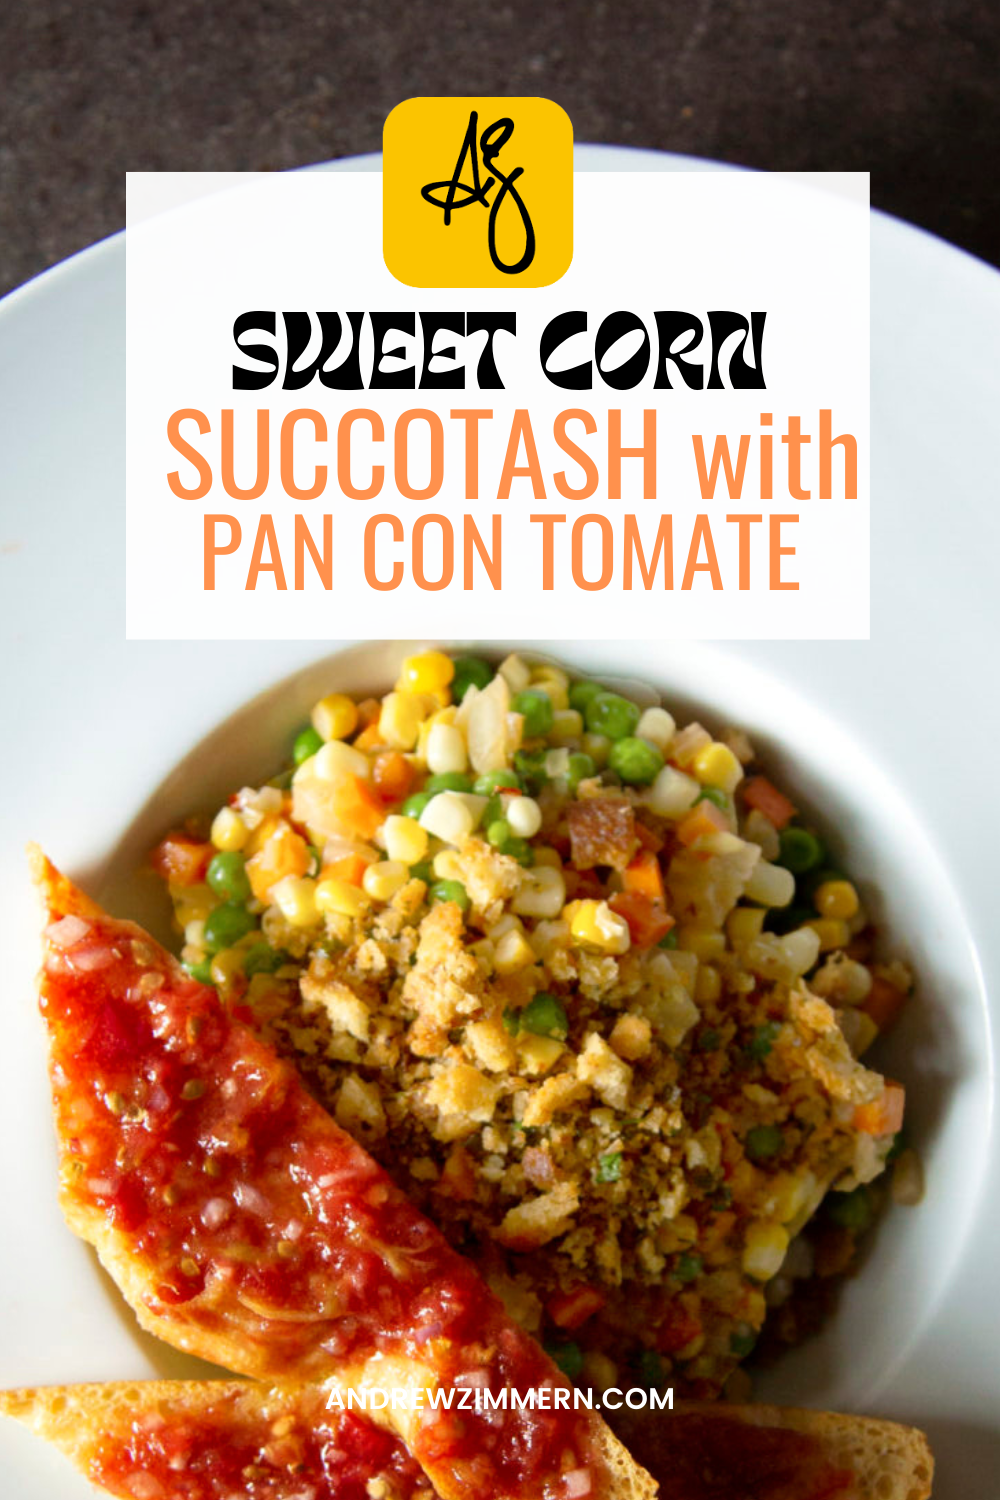 This sweet corn succotash with pan con tomate is the perfect way to cap off an amazing harvest season and highlight the produce at its peak flavor.